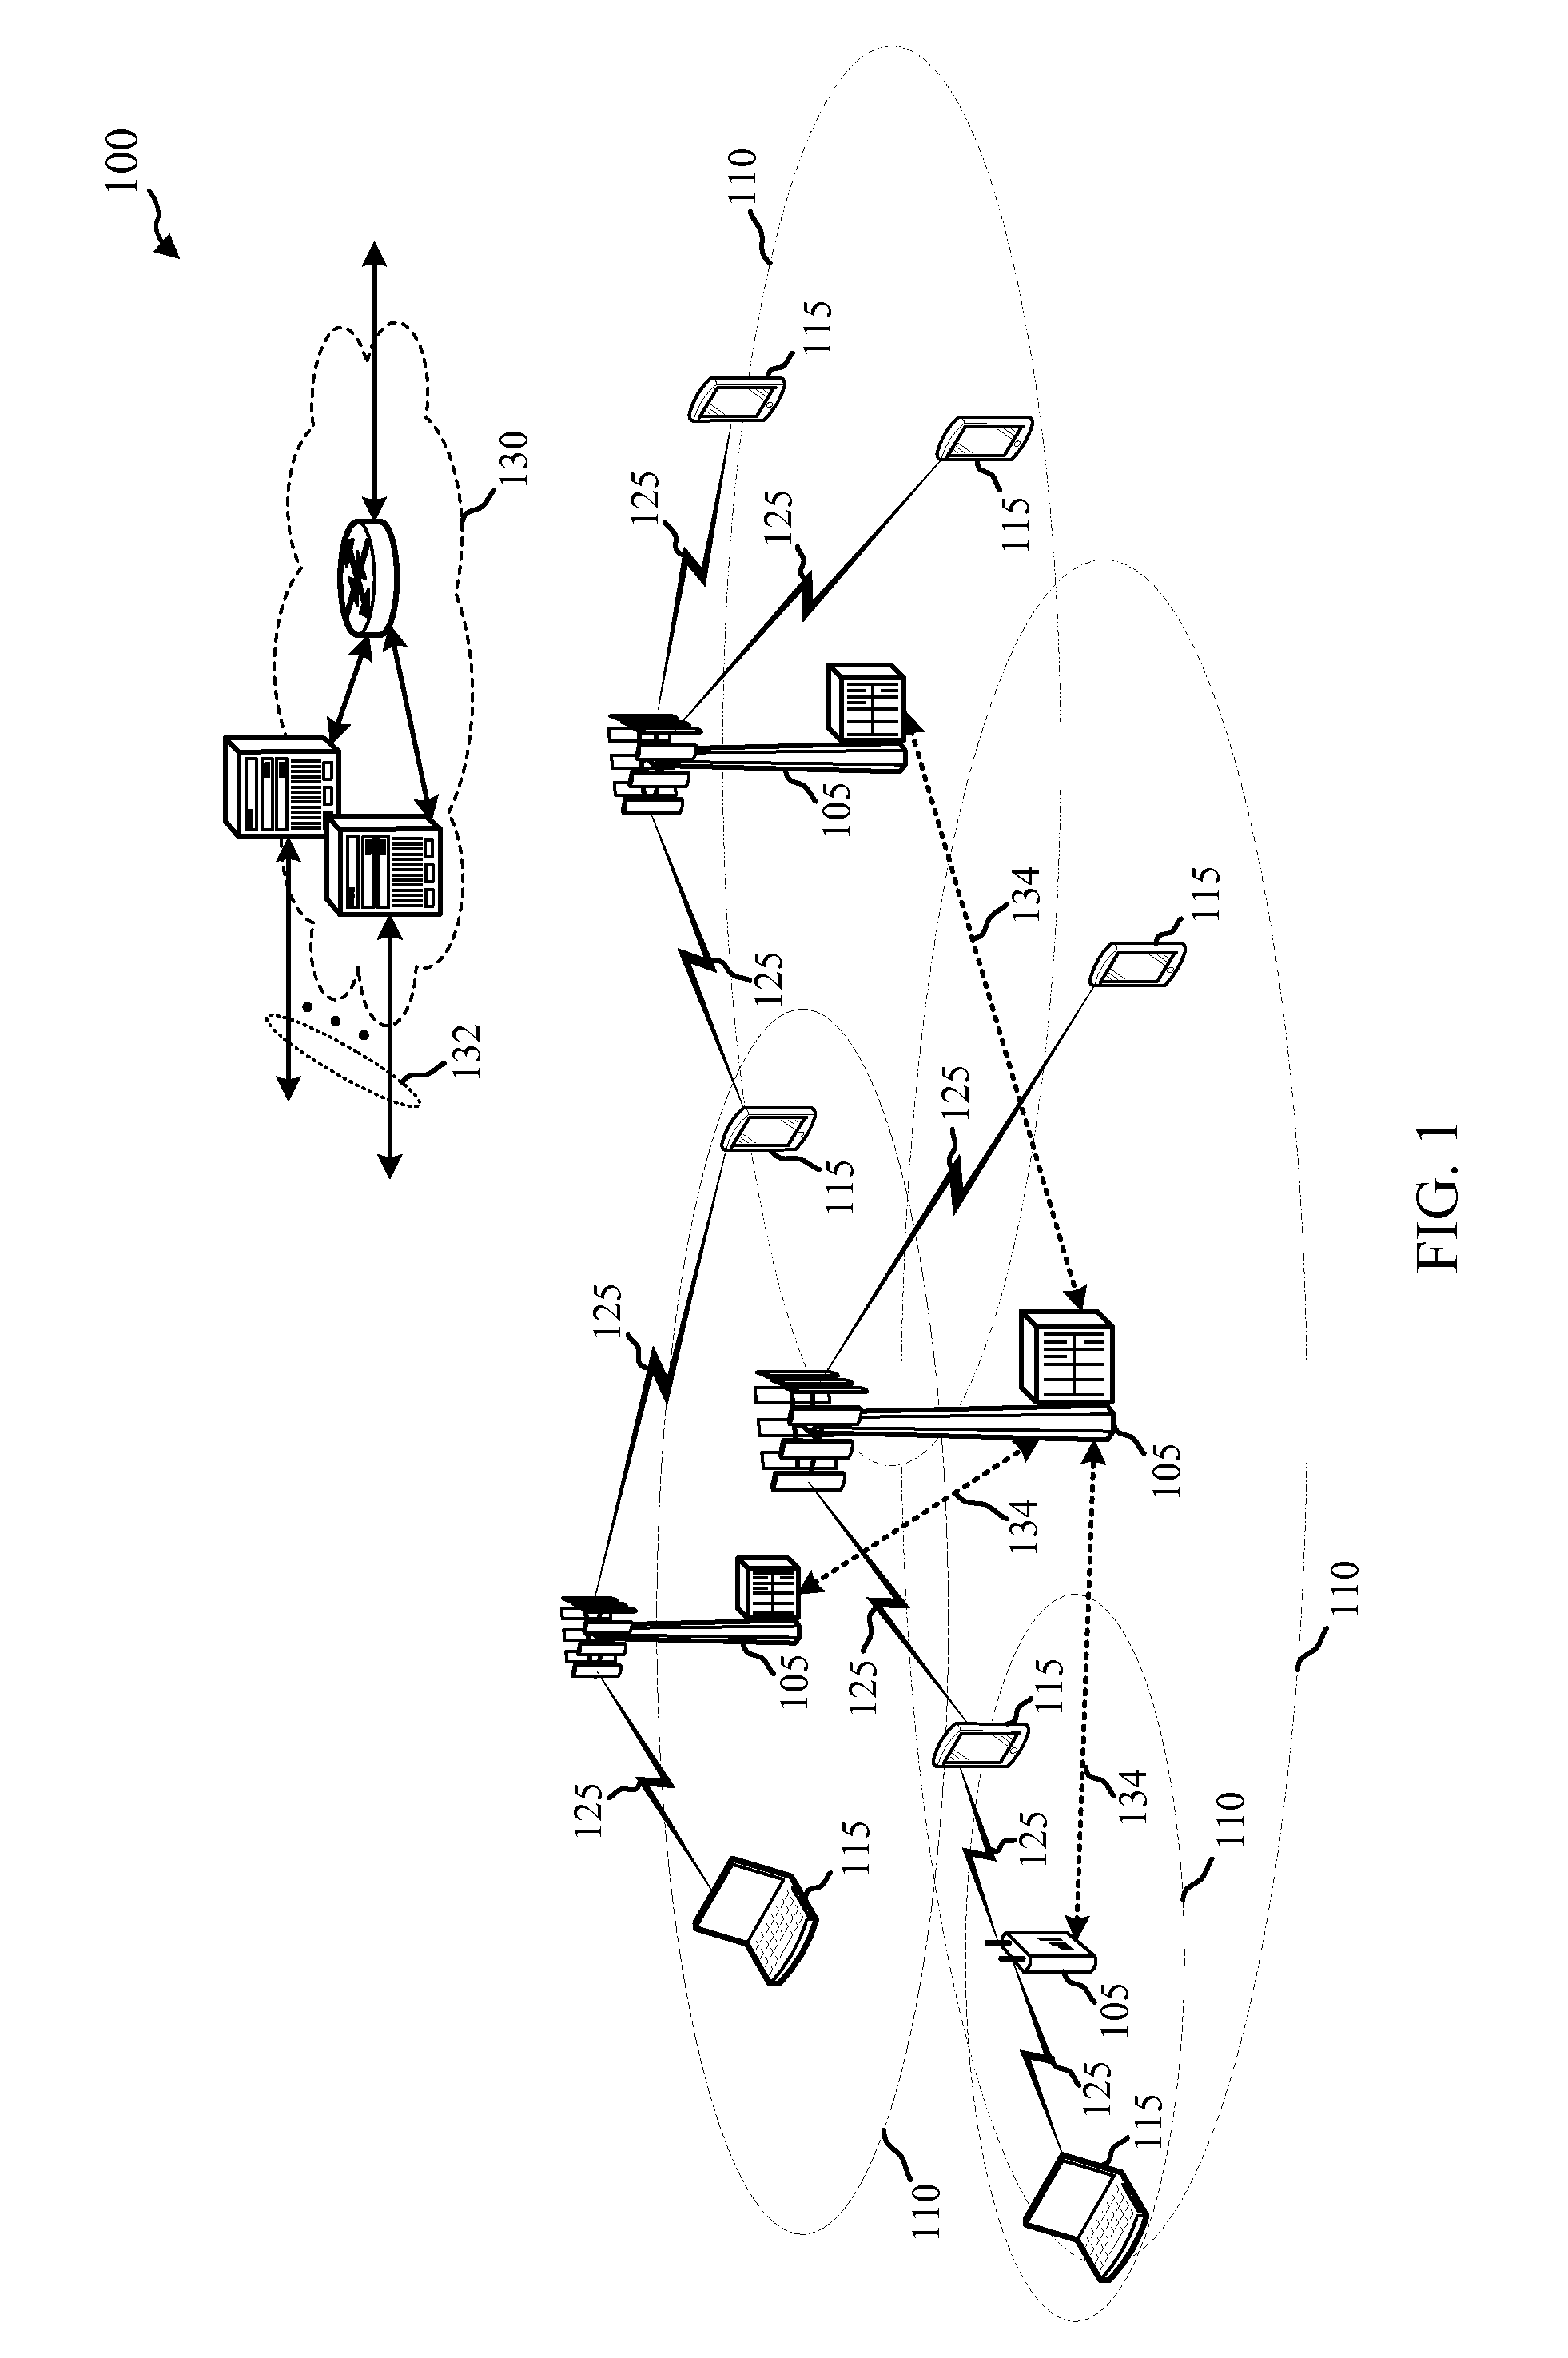 Techniques for transmitting channel usage beacon signals over an unlicensed radio frequency spectrum band